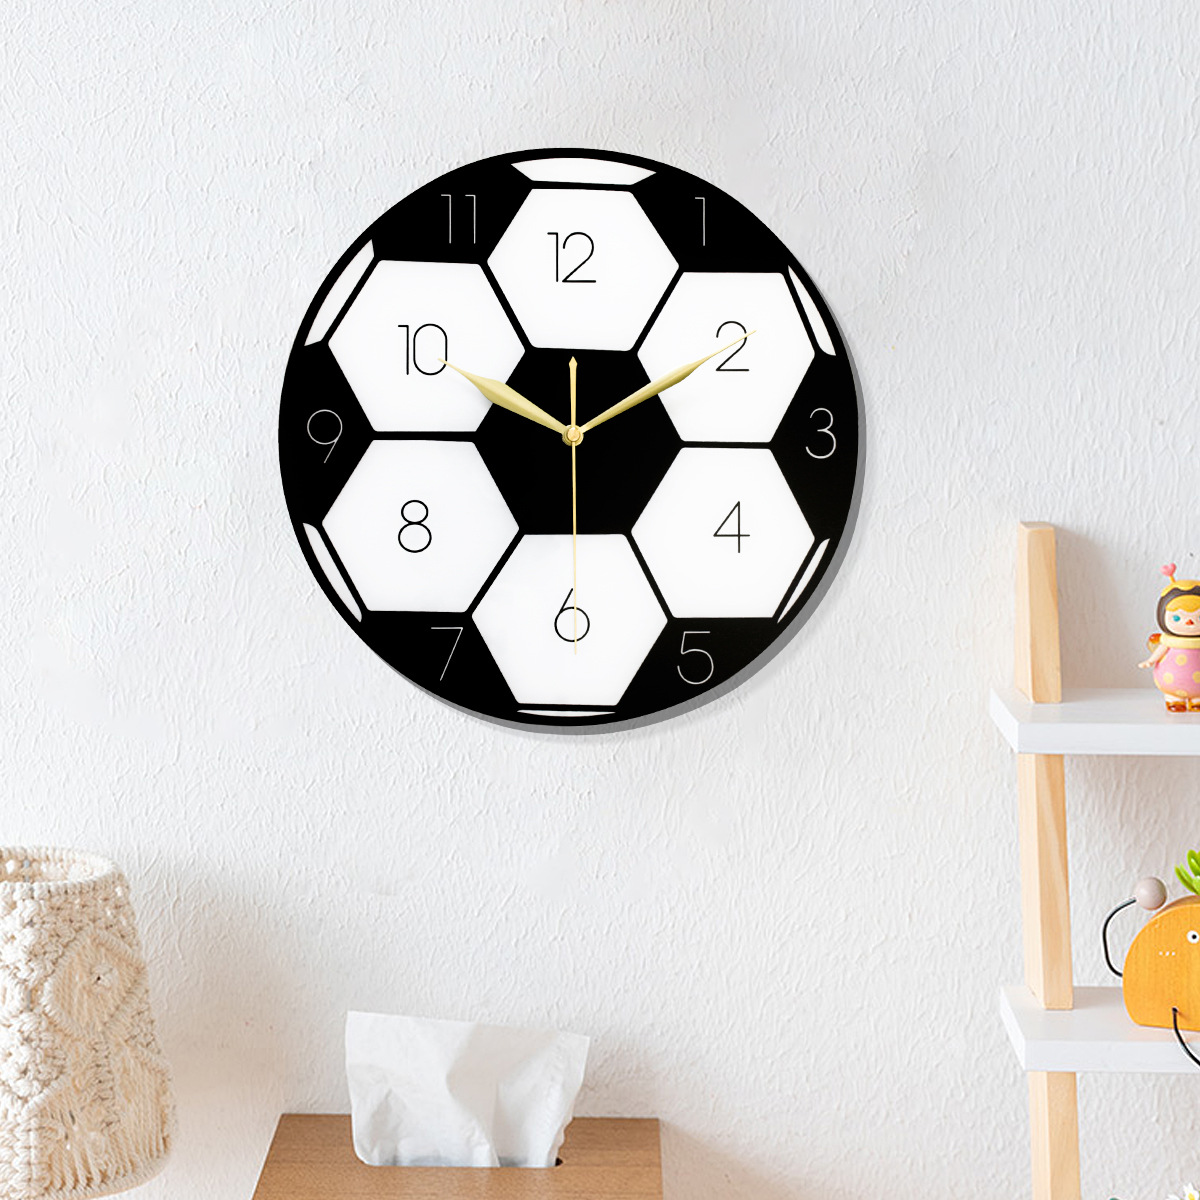 Football Creative Acrylic Wall Clock for Party Restaurant Ktv Family Living Room Bedroom Office Decorations Mute